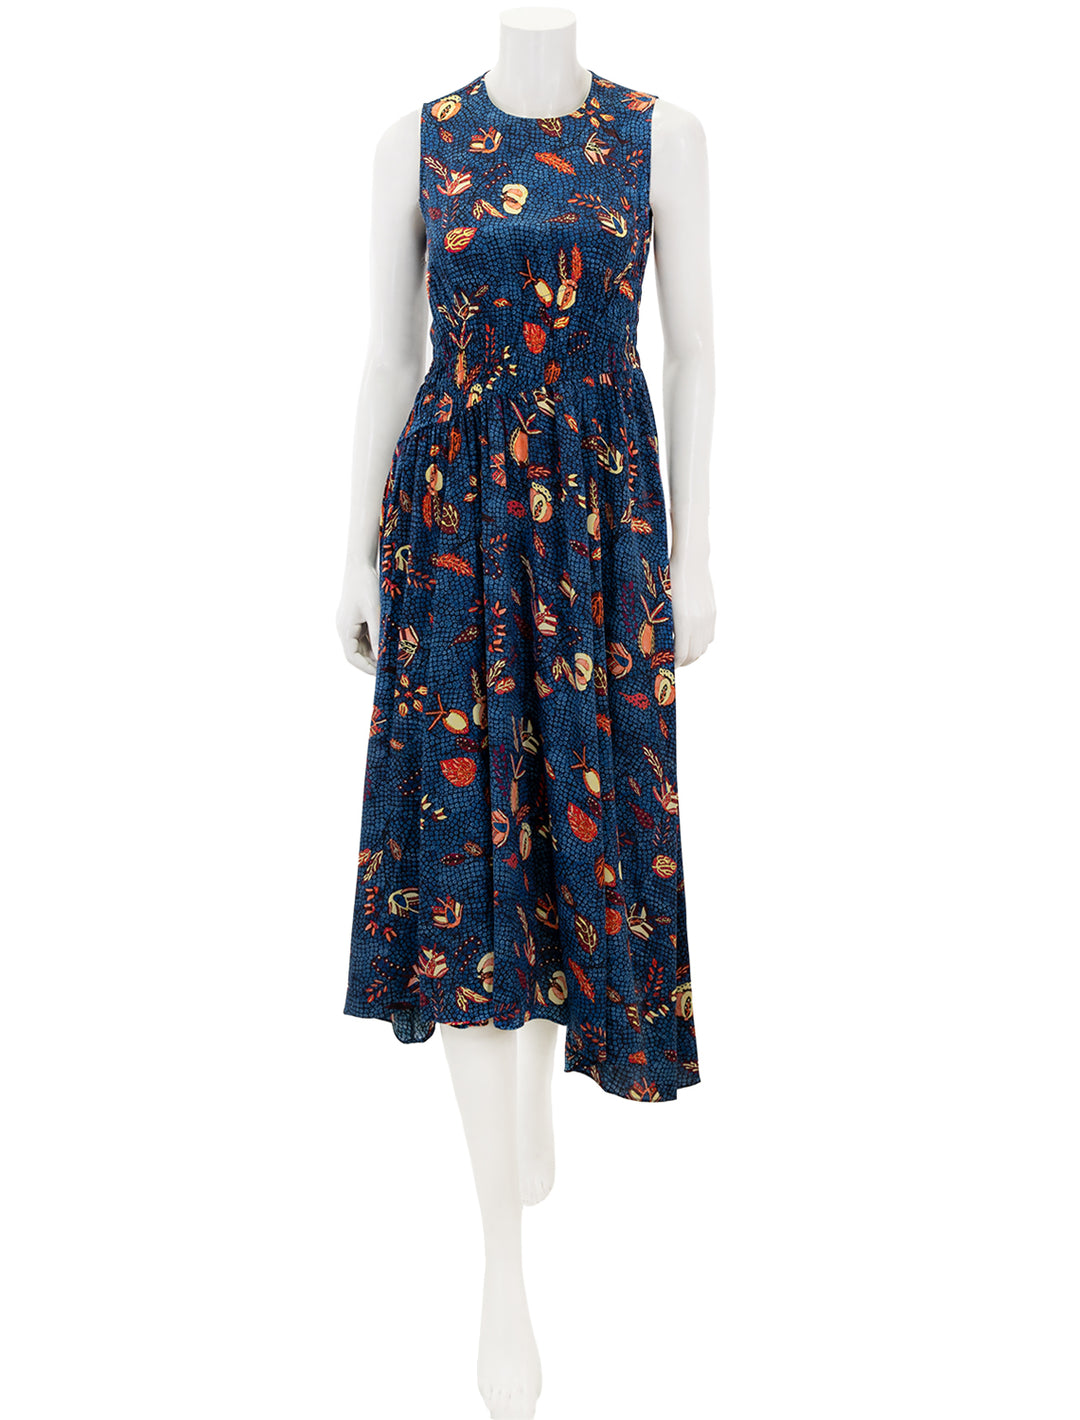 Front view of Ulla Johnson's luca dress in blue dahlia.